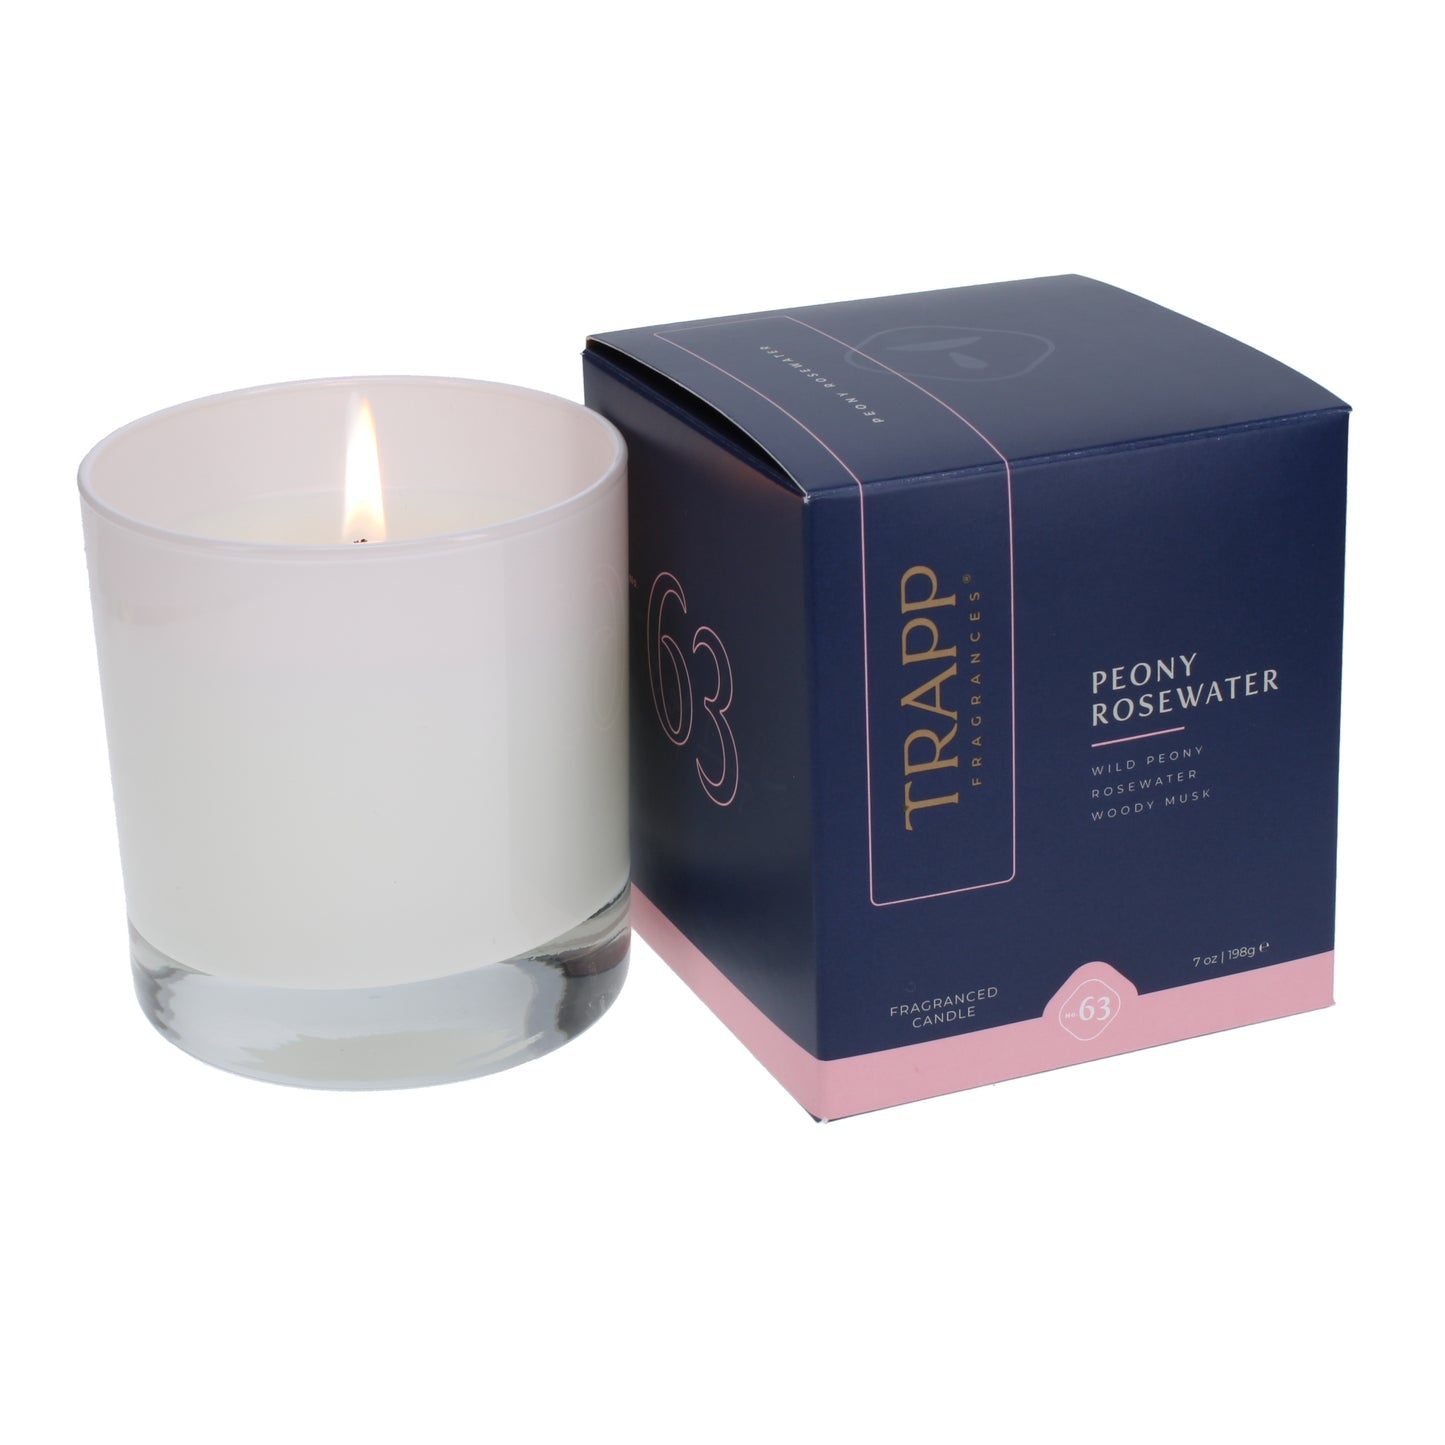 No. 63 Peony Rosewater 7 oz. Candle in Signature Box Image 2